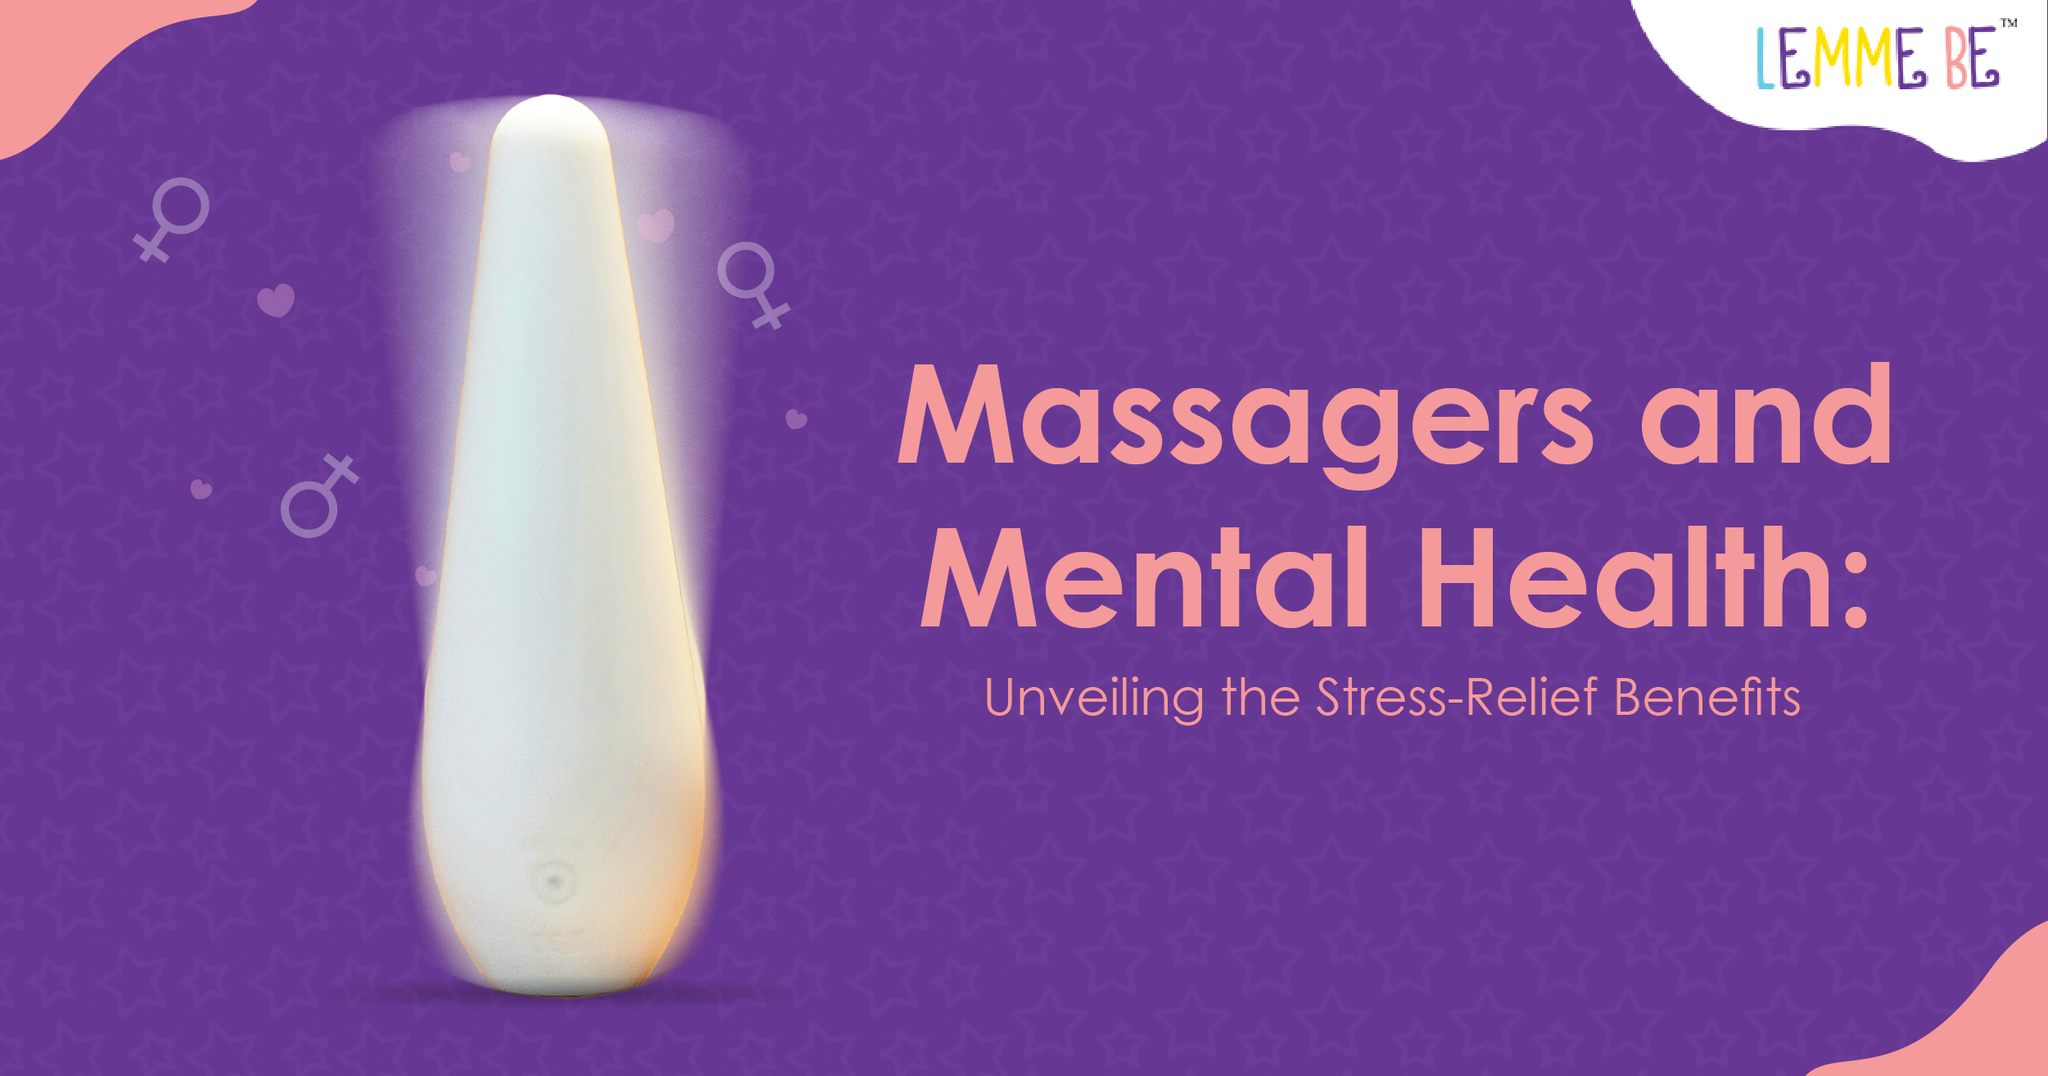 Massagers and Mental Health: Unveiling the Stress-Relief Benefits